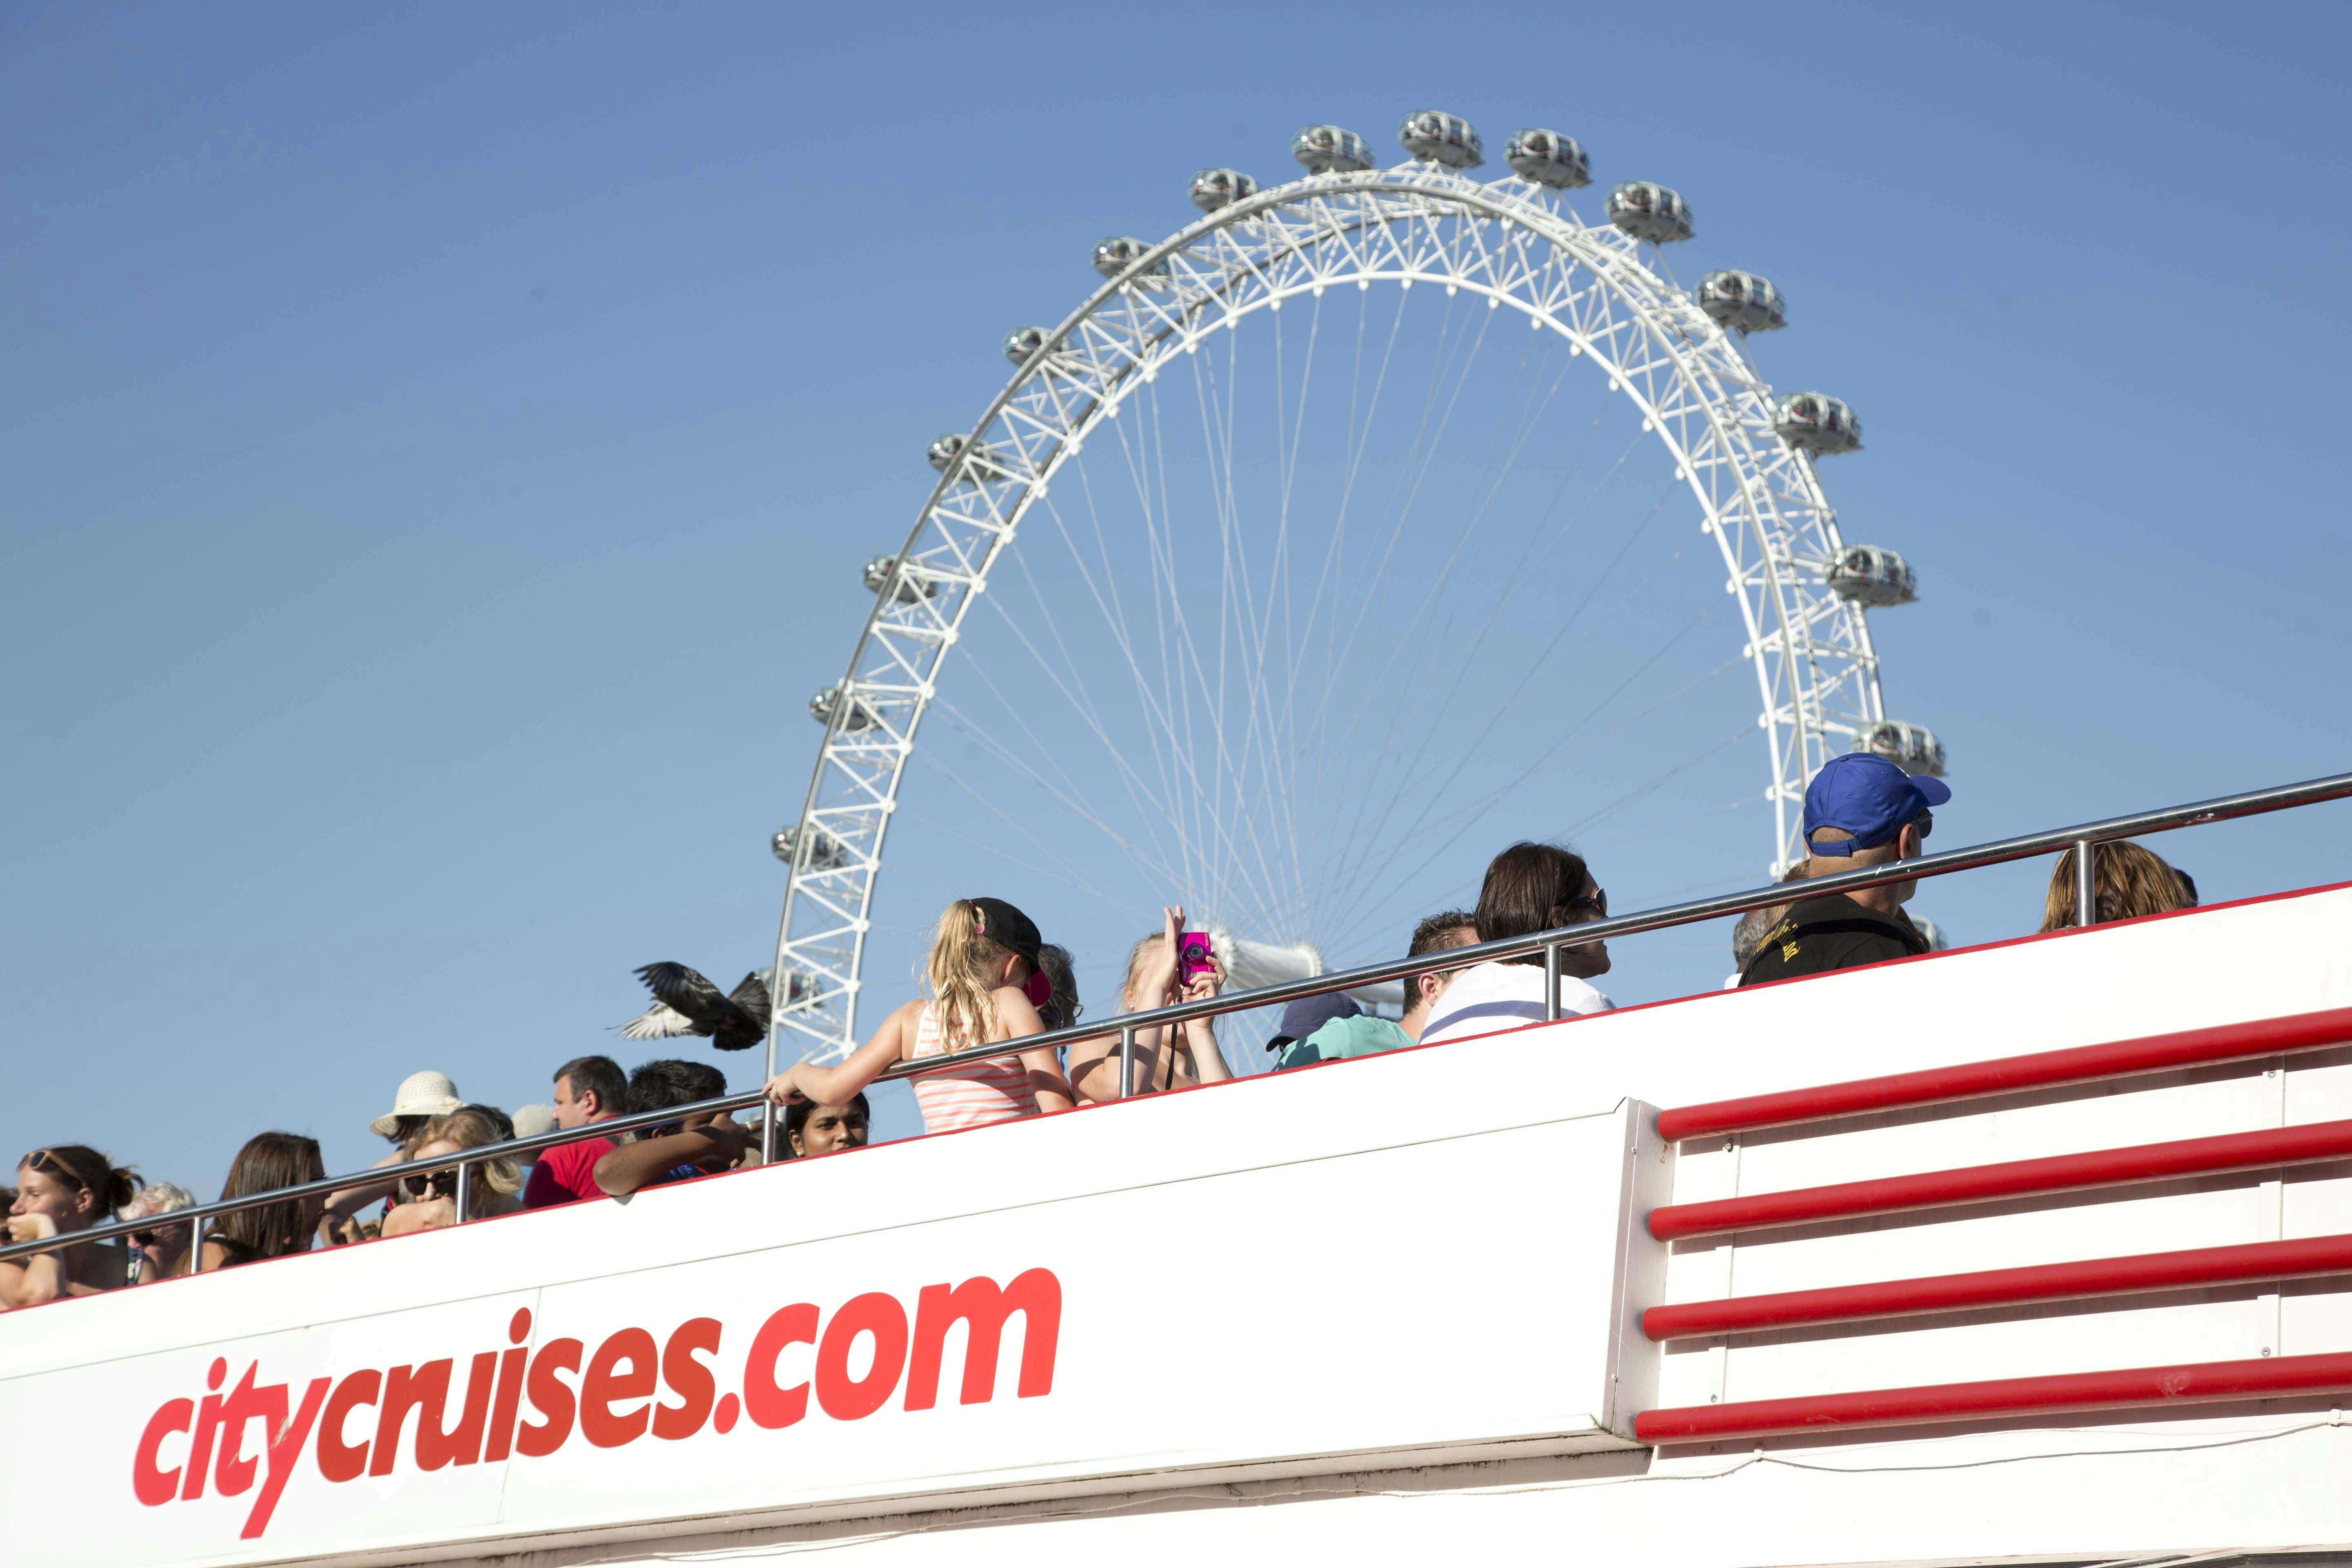 Tootbus Must See Londen: hop on, hop off-bustour met cruise